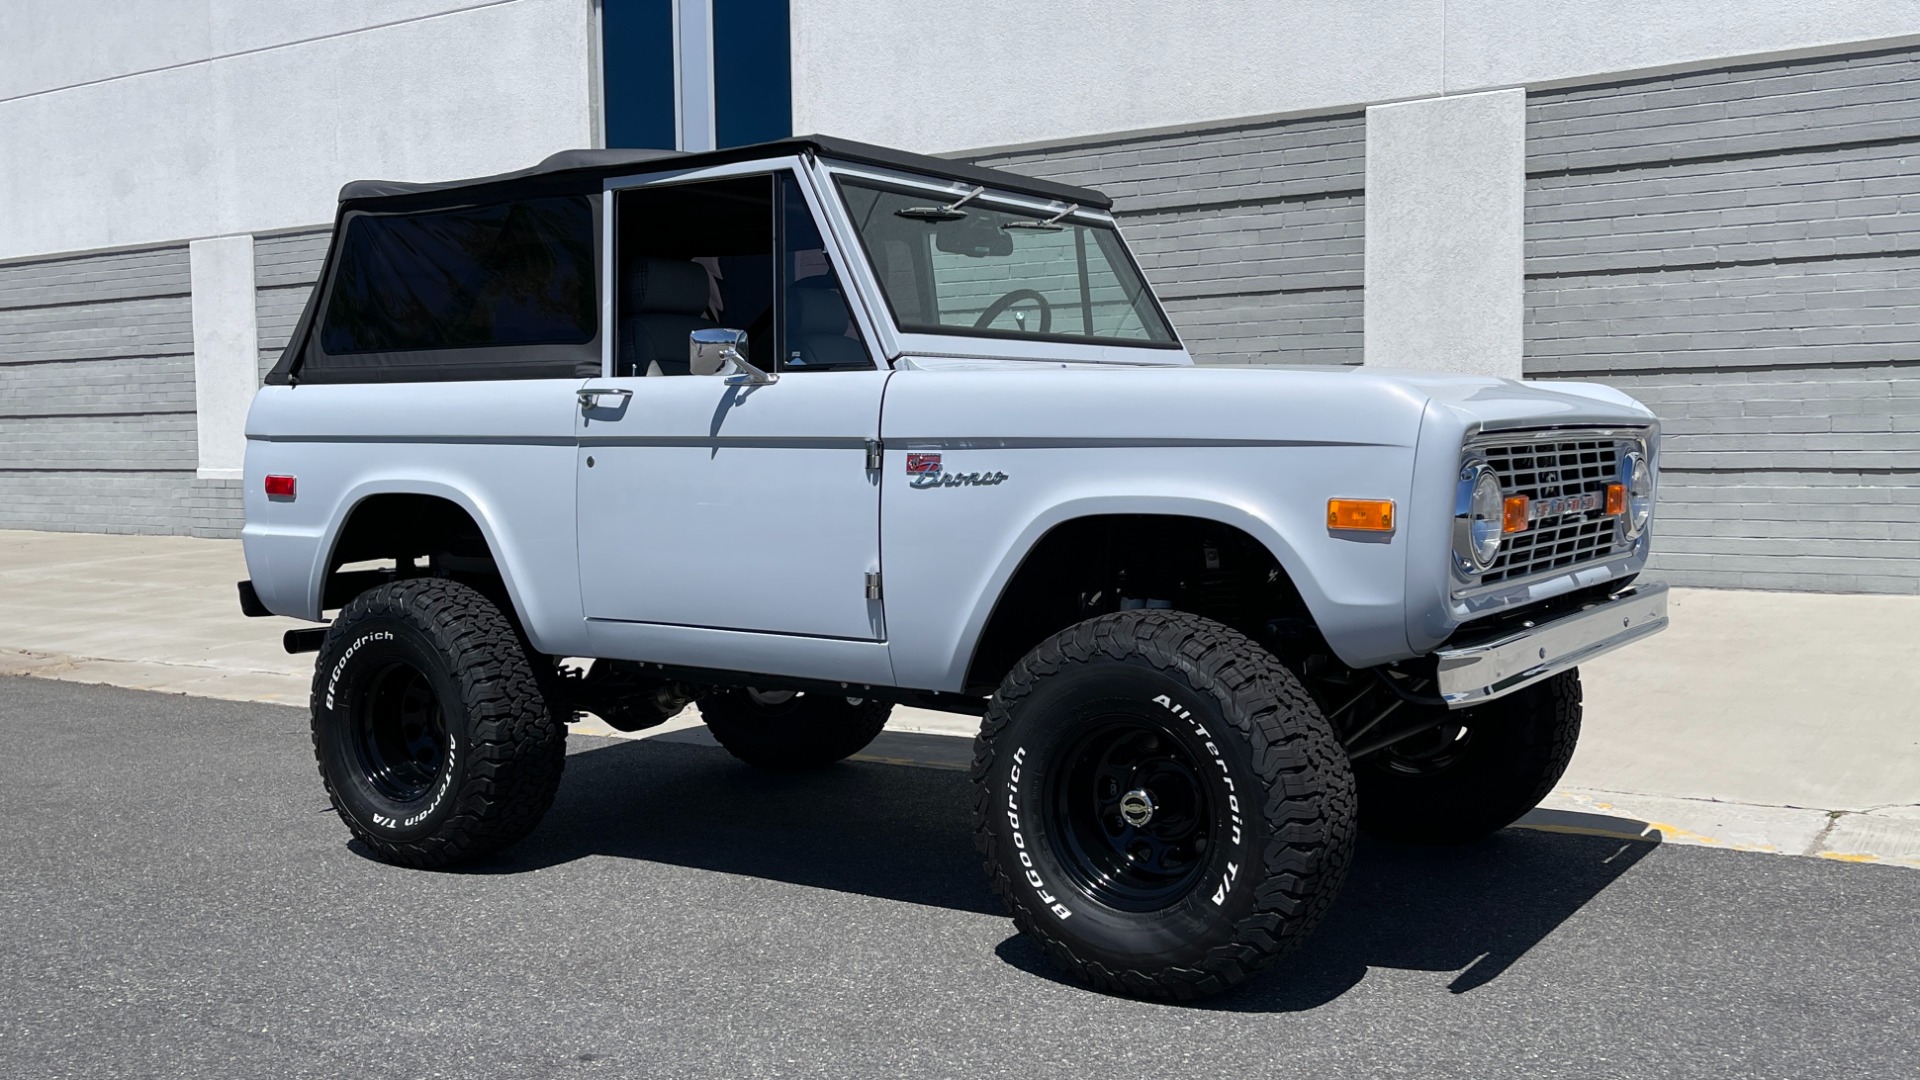 Used 1976 Ford BRONCO RESTO-MOD 4X4 / COYOTE 5.0L / AUTO / HTD STS / ALL NEW / LOW MILES for sale $239,999 at Formula Imports in Charlotte NC 28227 5